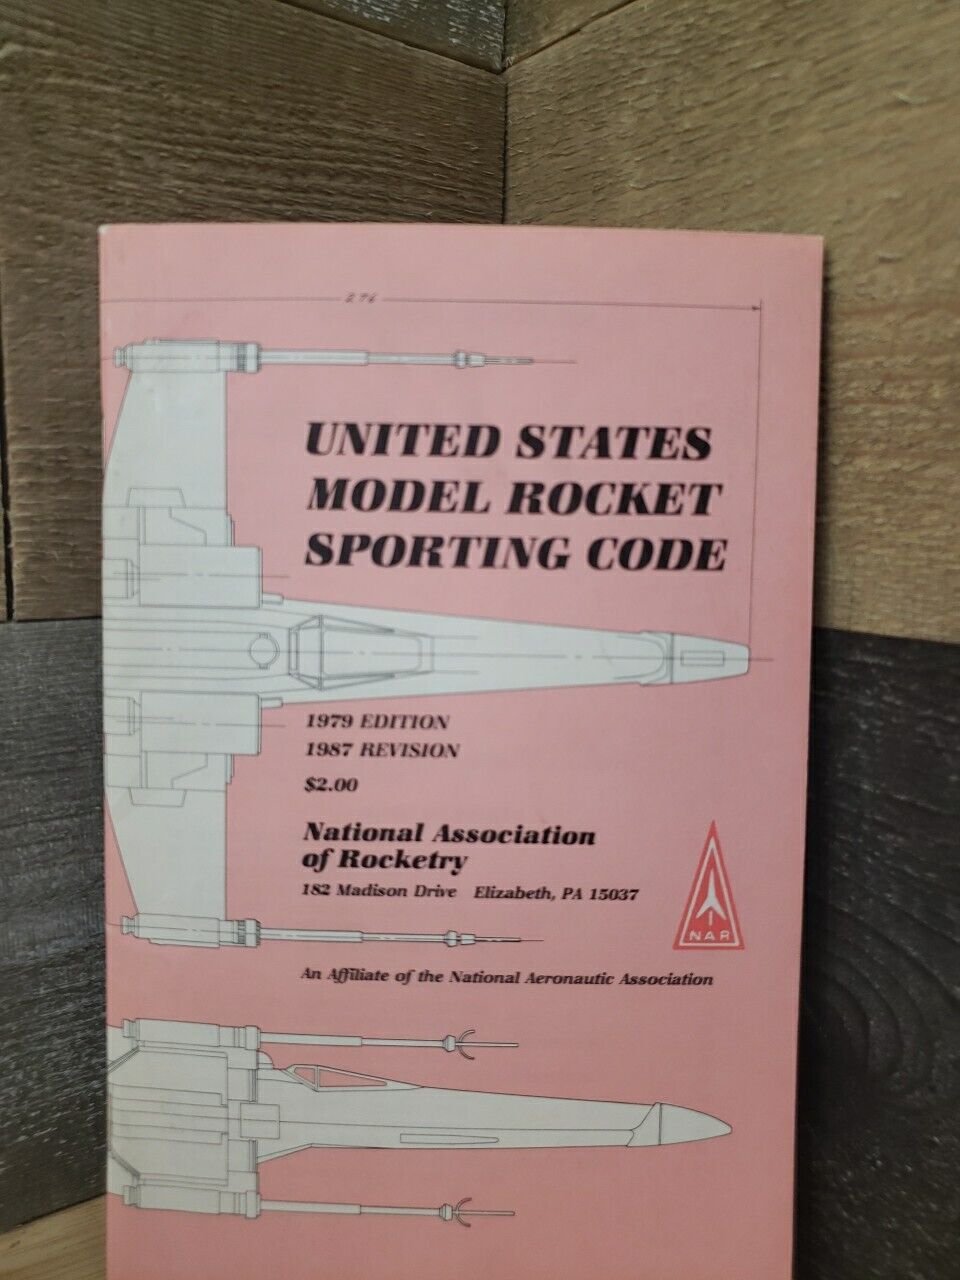 U.S. Model Rocket Sporting Code Pamphlet 1979 1987 Revision X-Wing